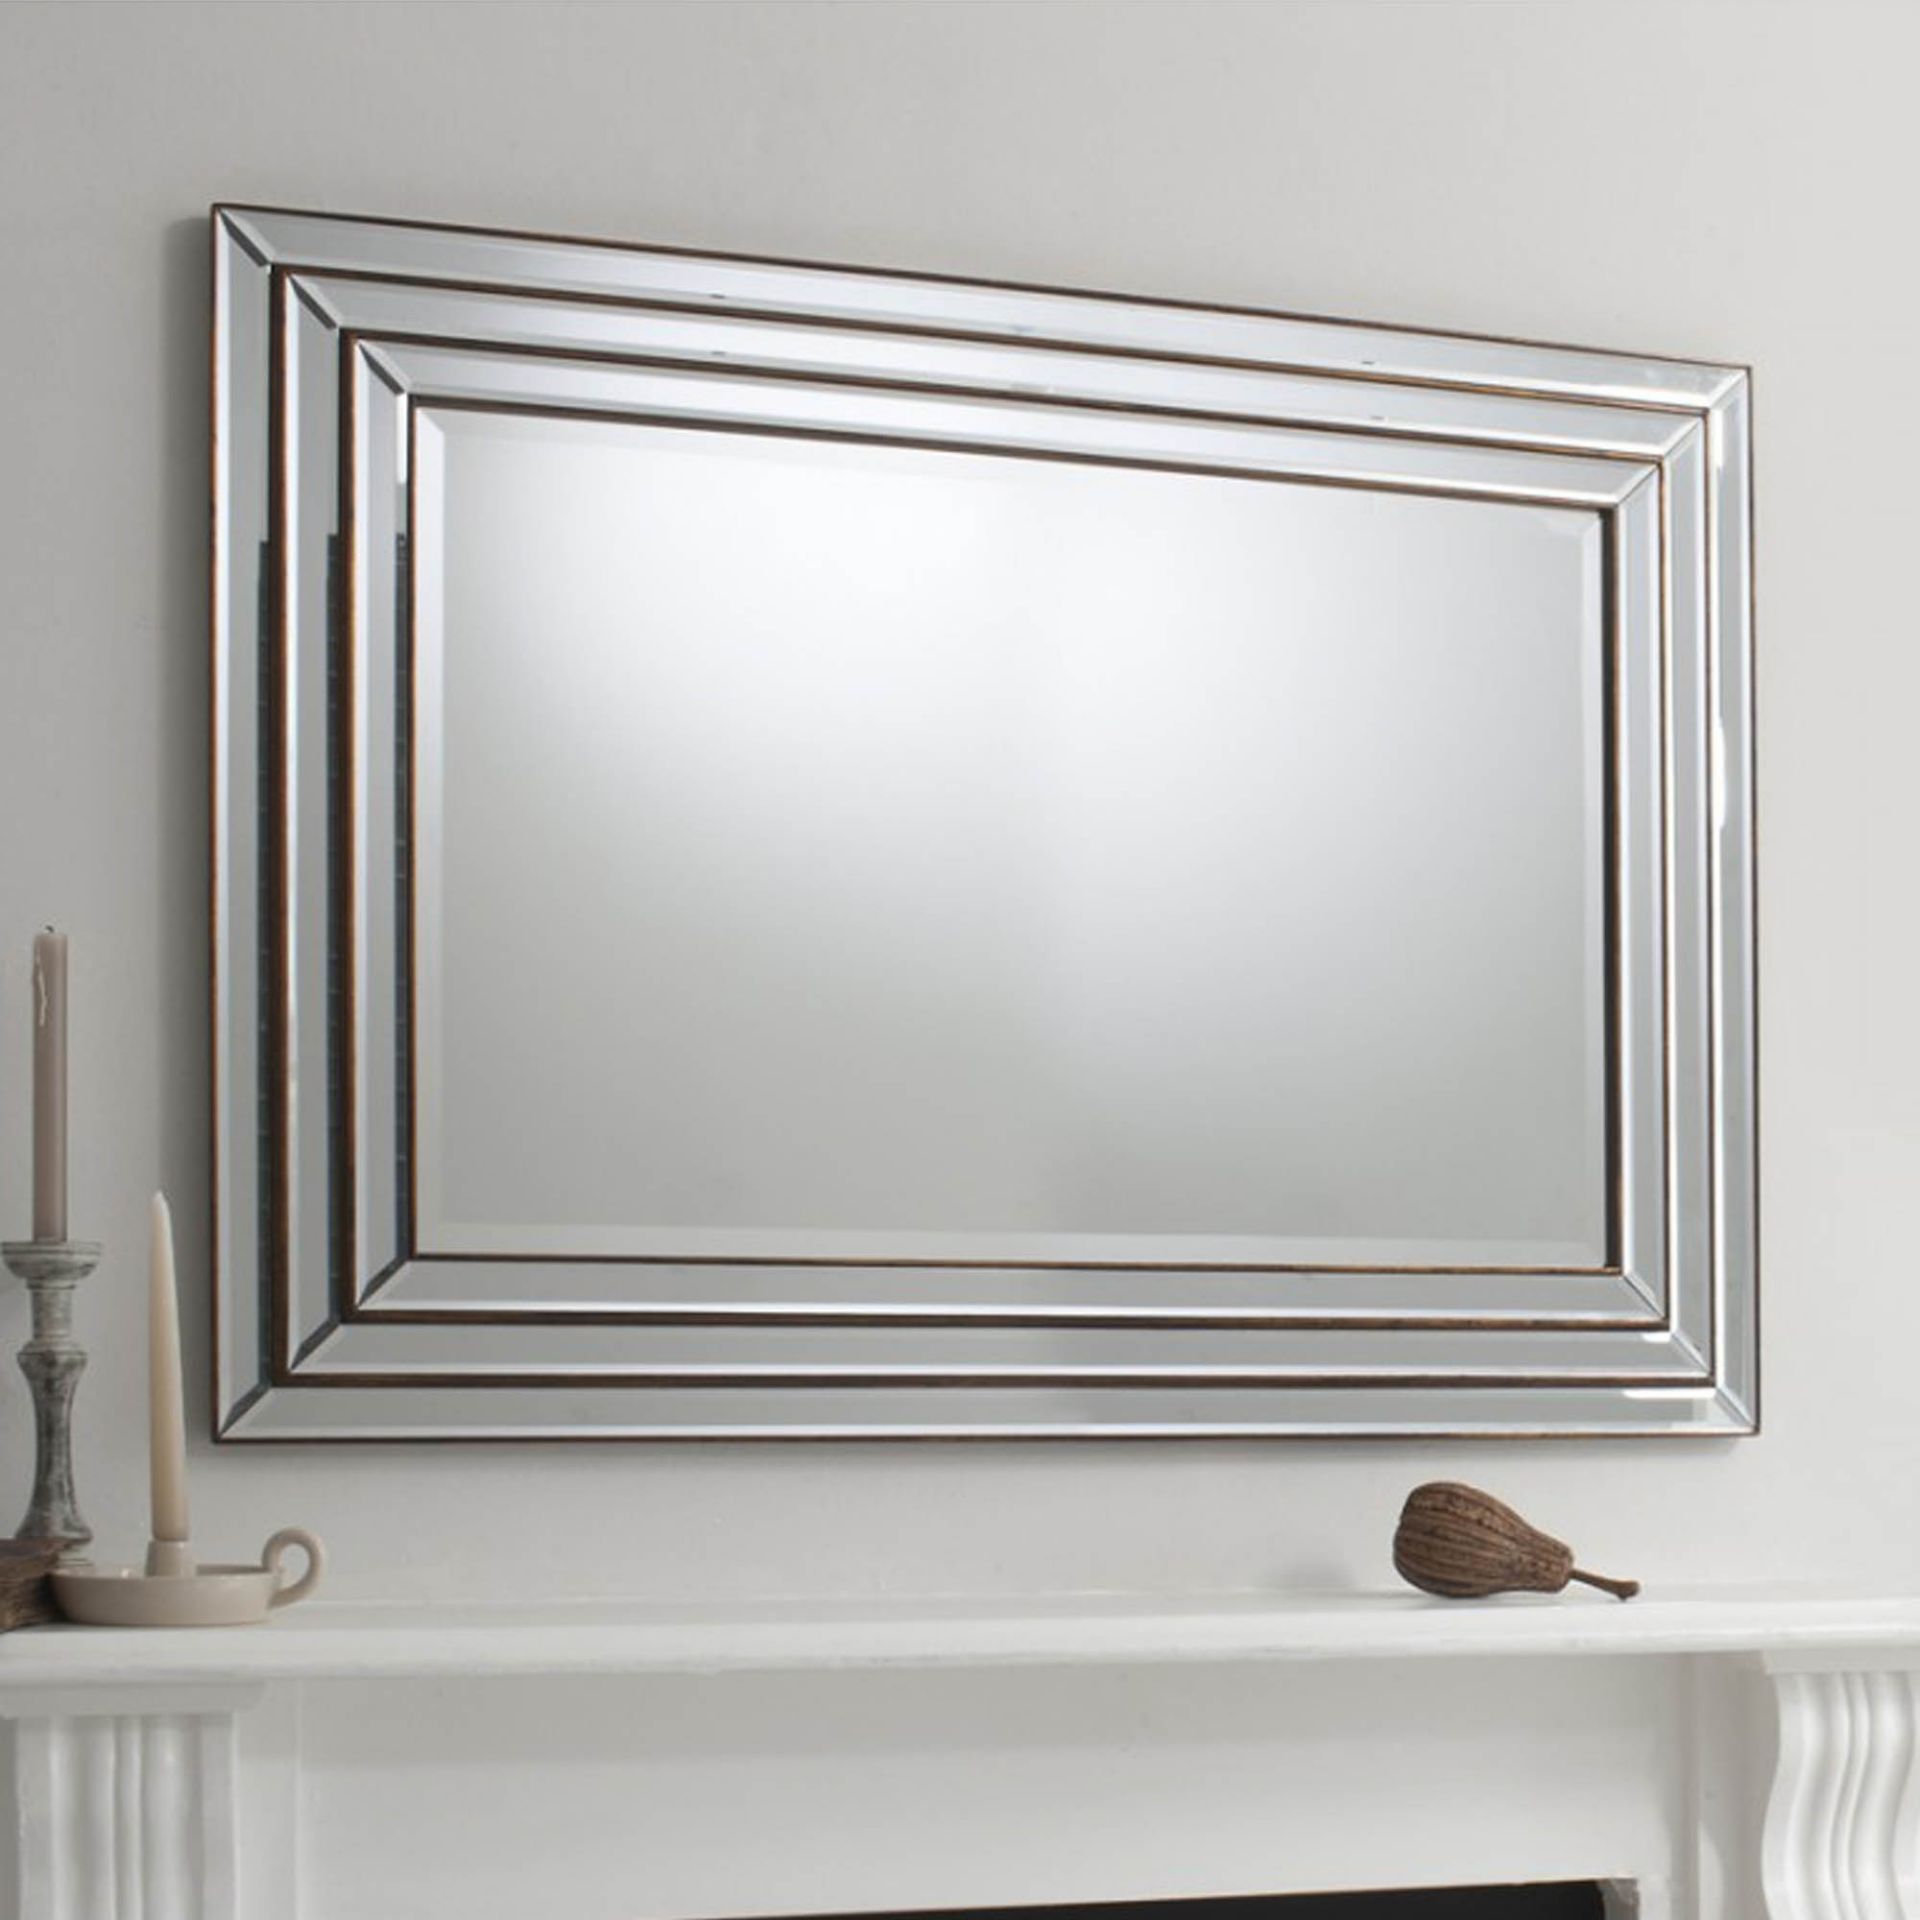 Chamberley Mirror A stunning, triple step, bevelled mirror frame with a warm bronze gleaming through